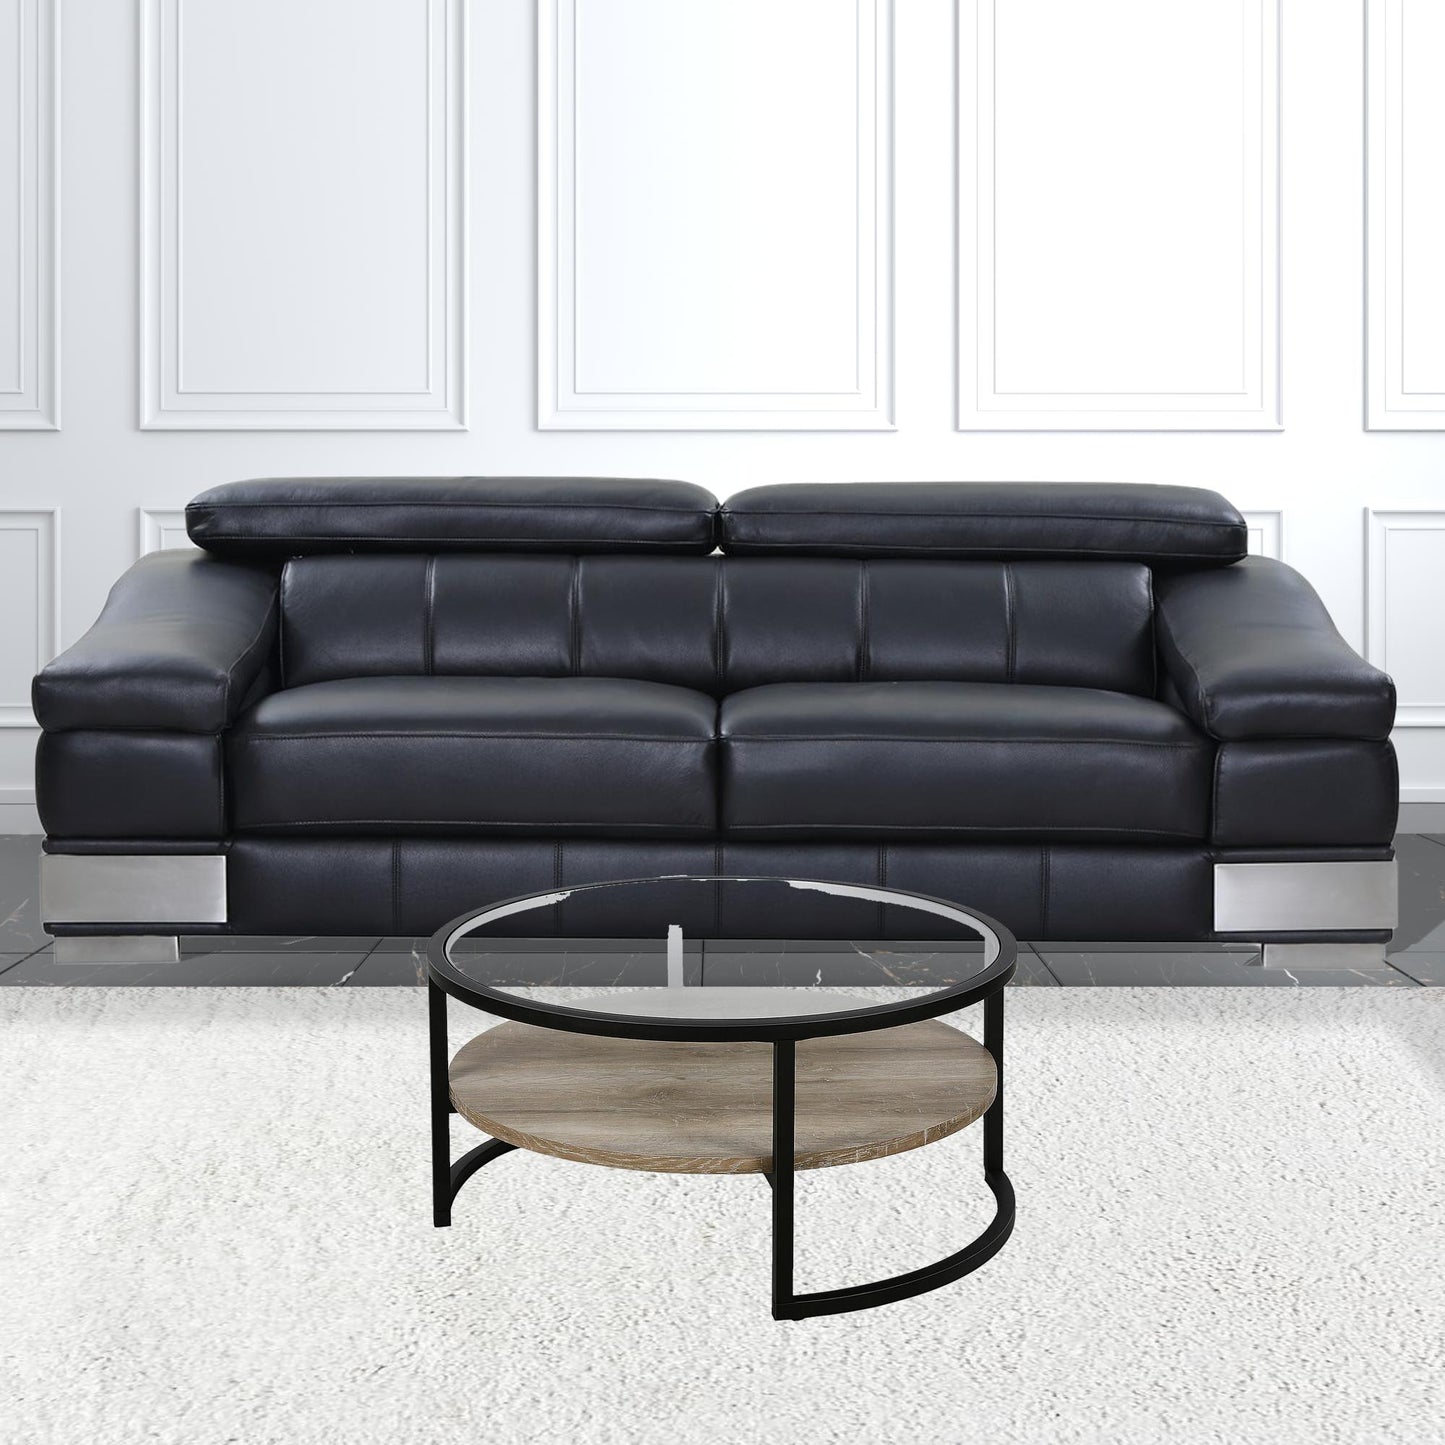 34" Black Glass Round Coffee Table With Shelf By Homeroots